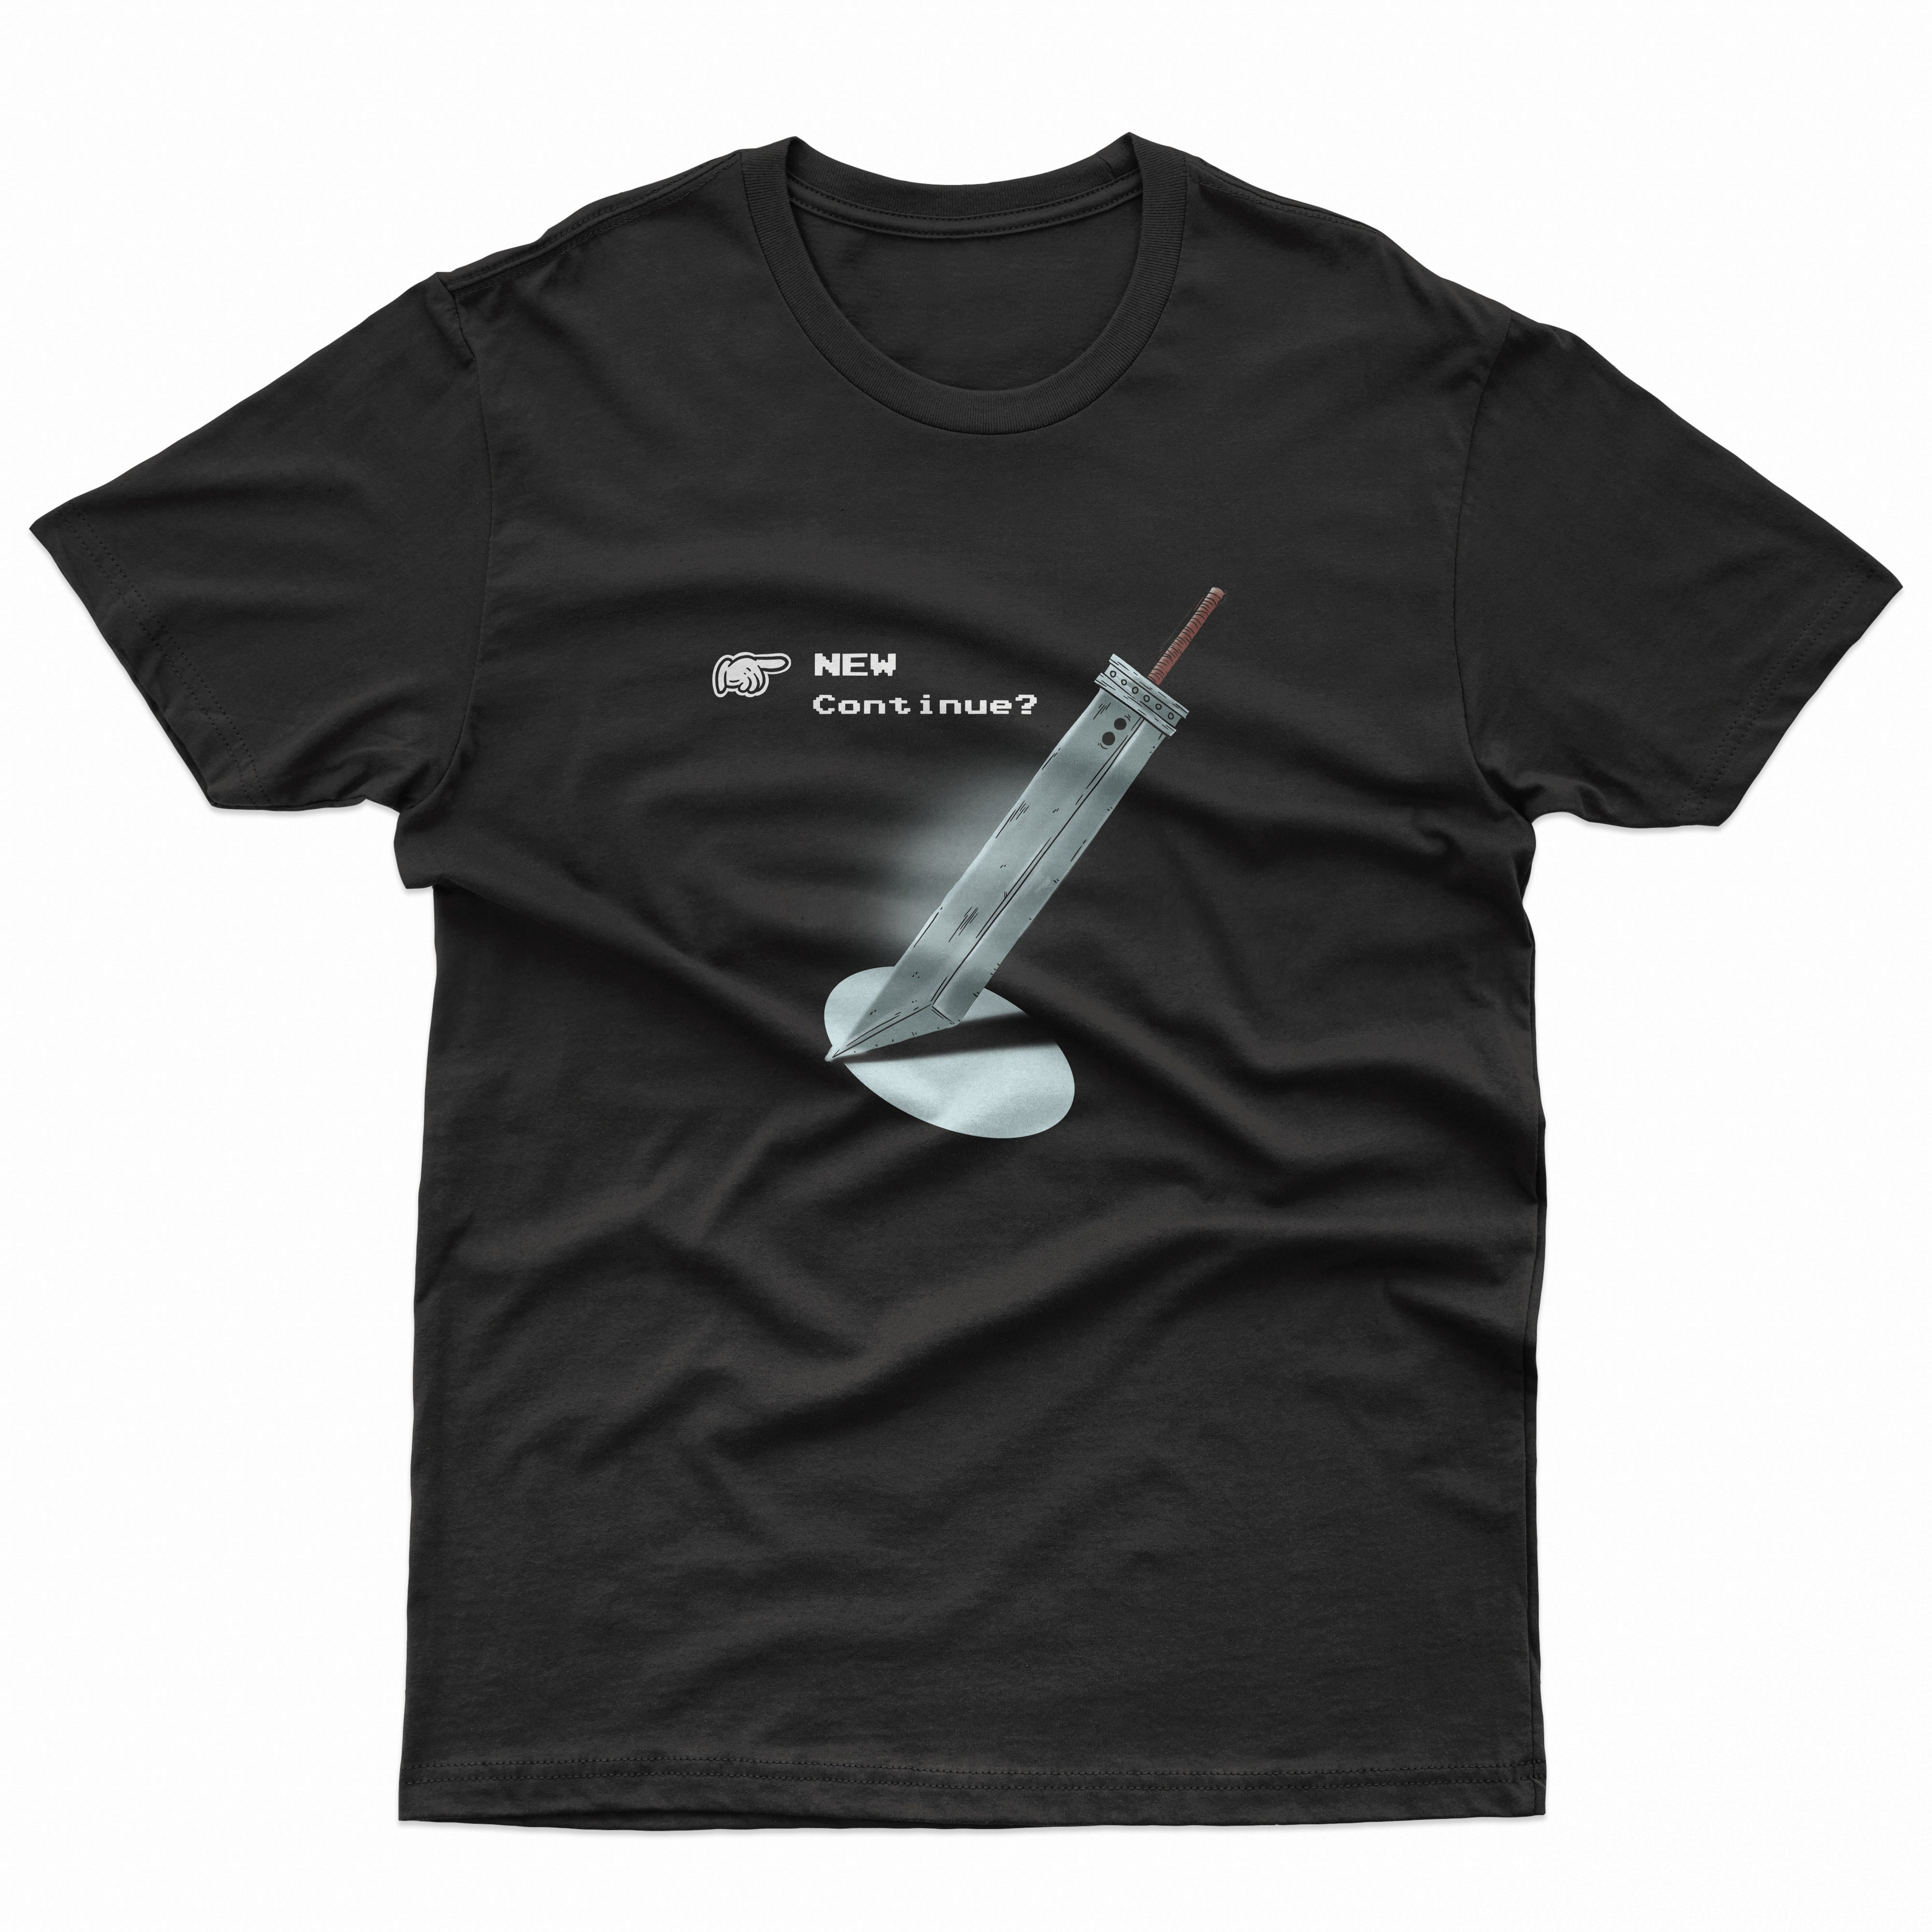 Continue Game T Shirt